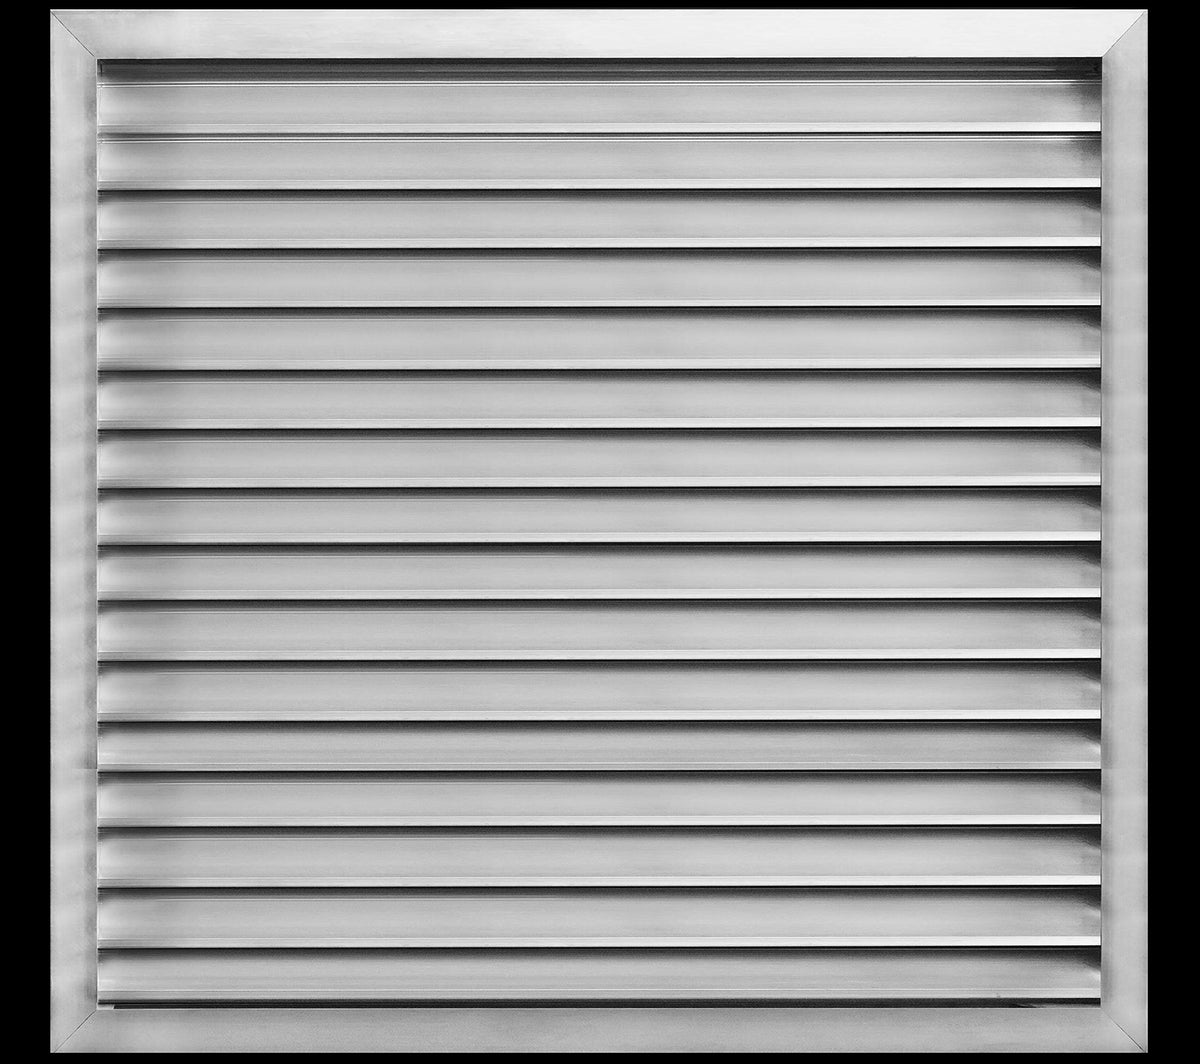 32&quot;w X 36&quot;h Aluminum Outdoor Weather Proof Louvers - Rain &amp; Waterproof Air Vent With Screen Mesh